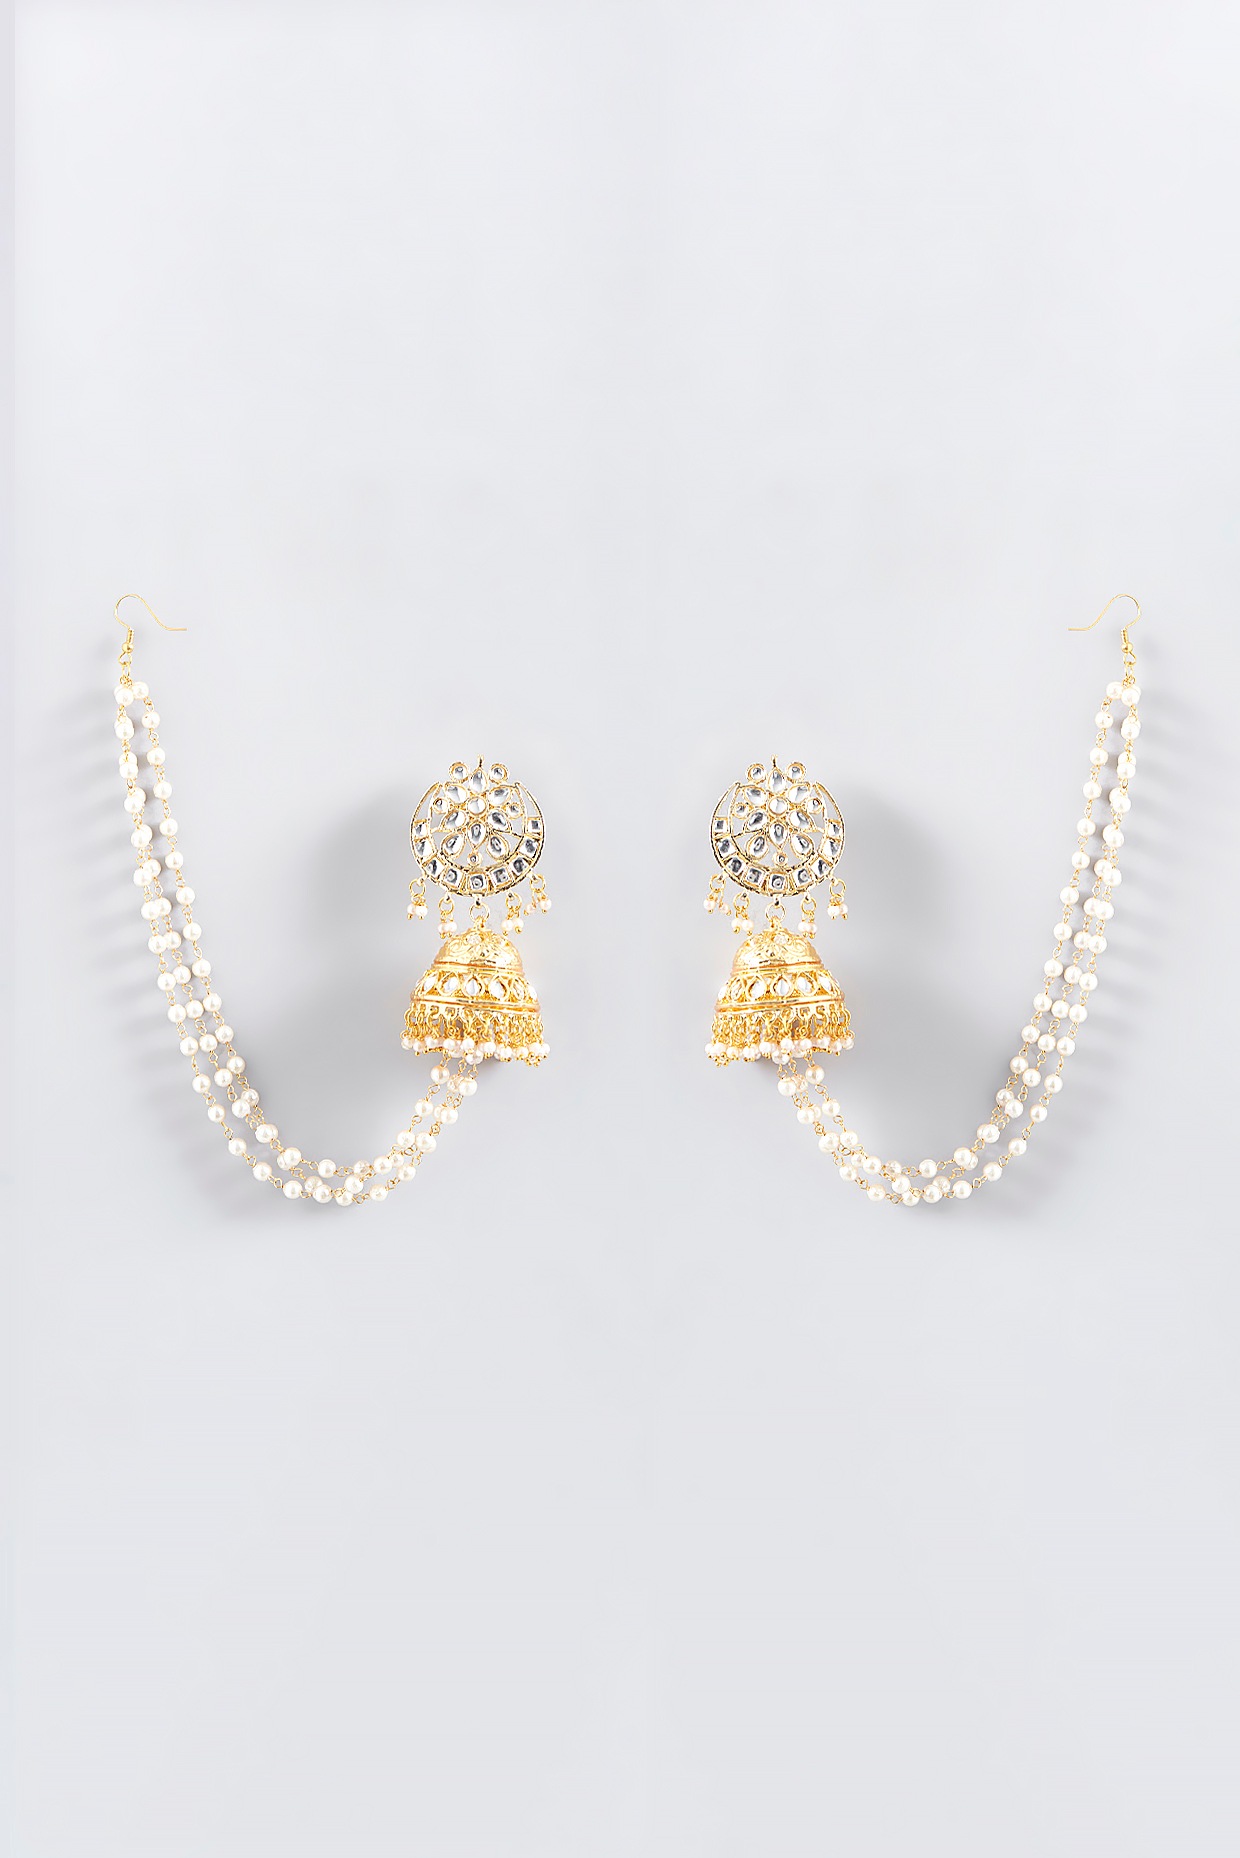 Gold Plated Pearl Tassel & White Stone Jhumka Earrings Design by Just  Shraddha at Pernia's Pop Up Shop 2024